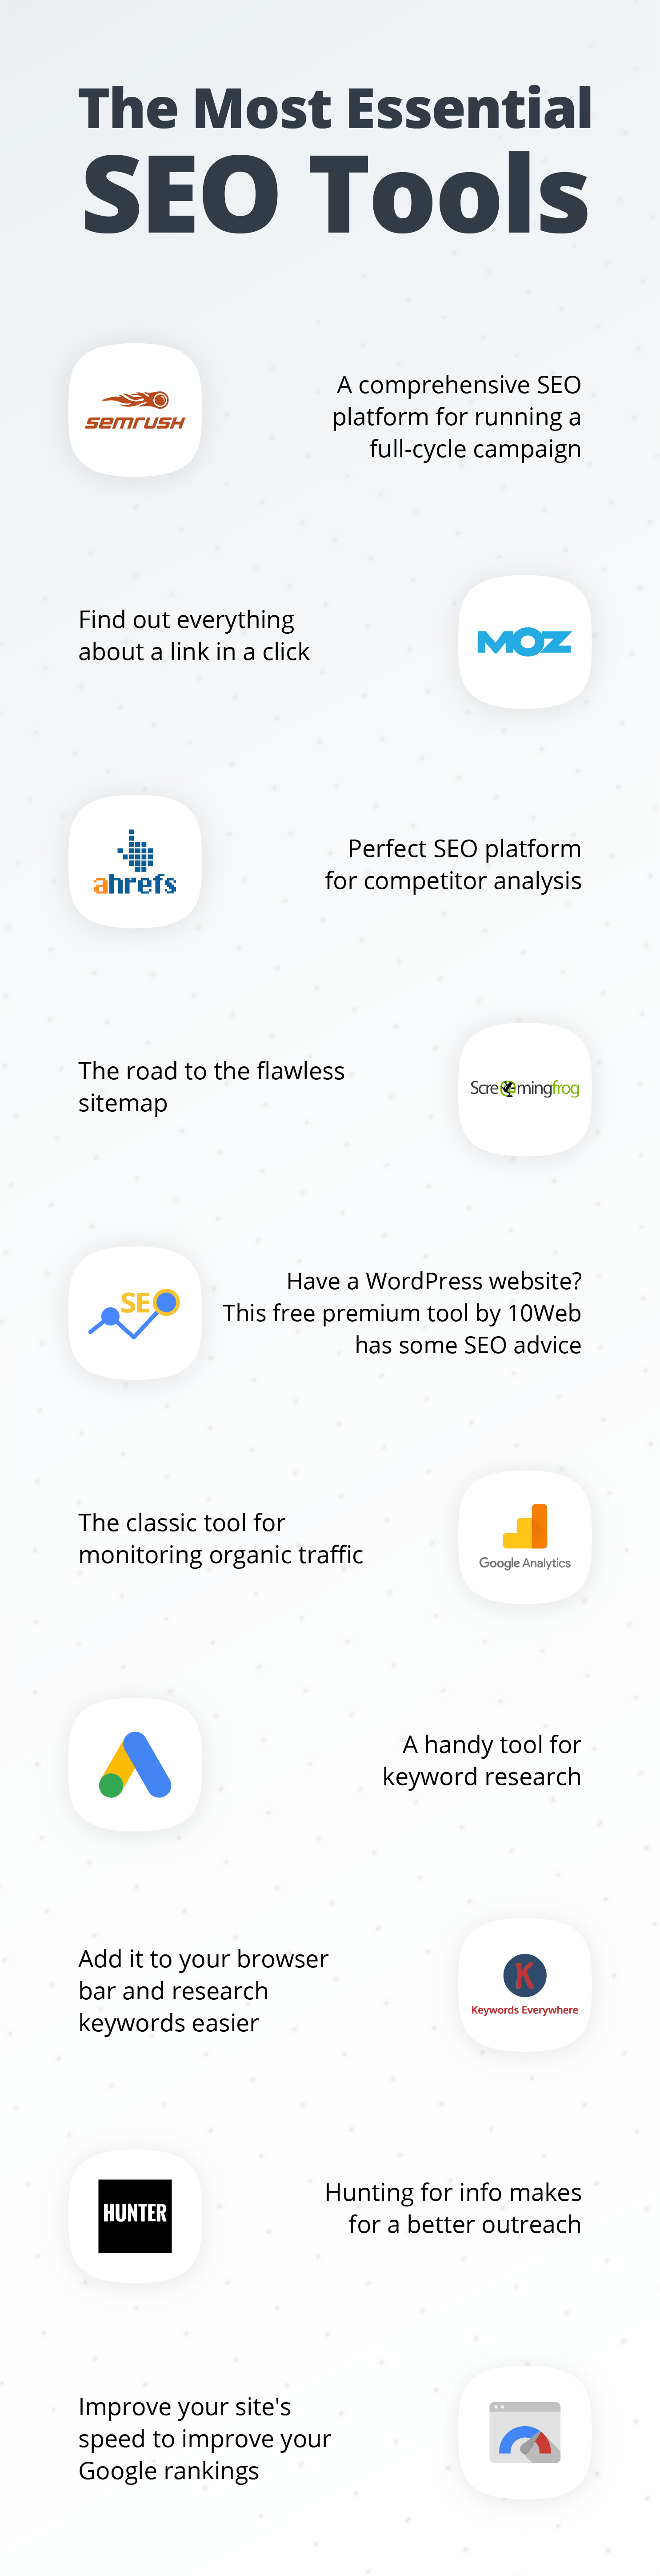 an infographic of ten most essential SEO tools